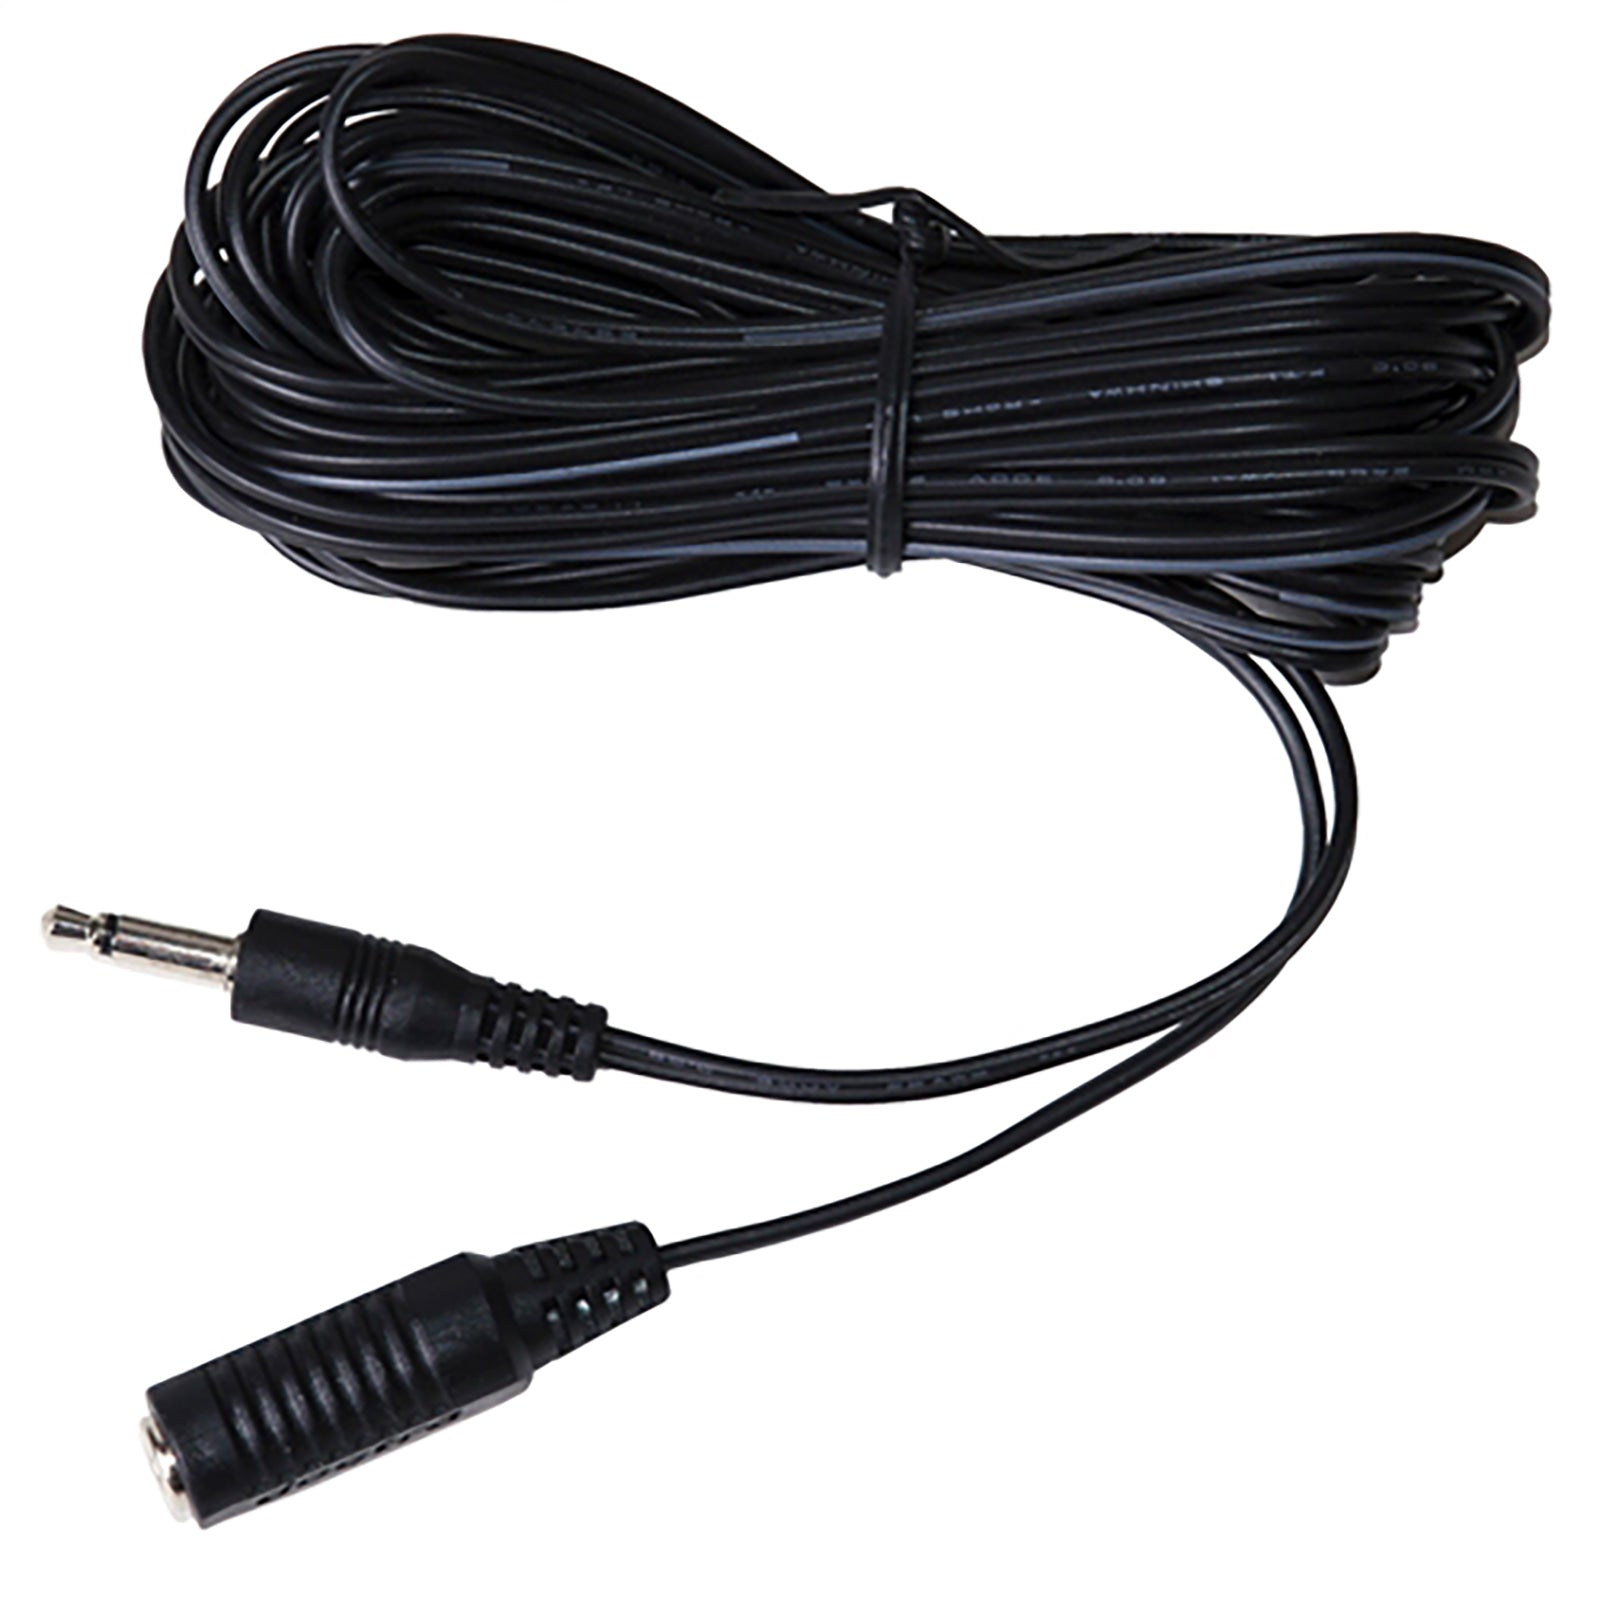 Gunners Up Extension Cable — 6ft, 15ft, 25ft